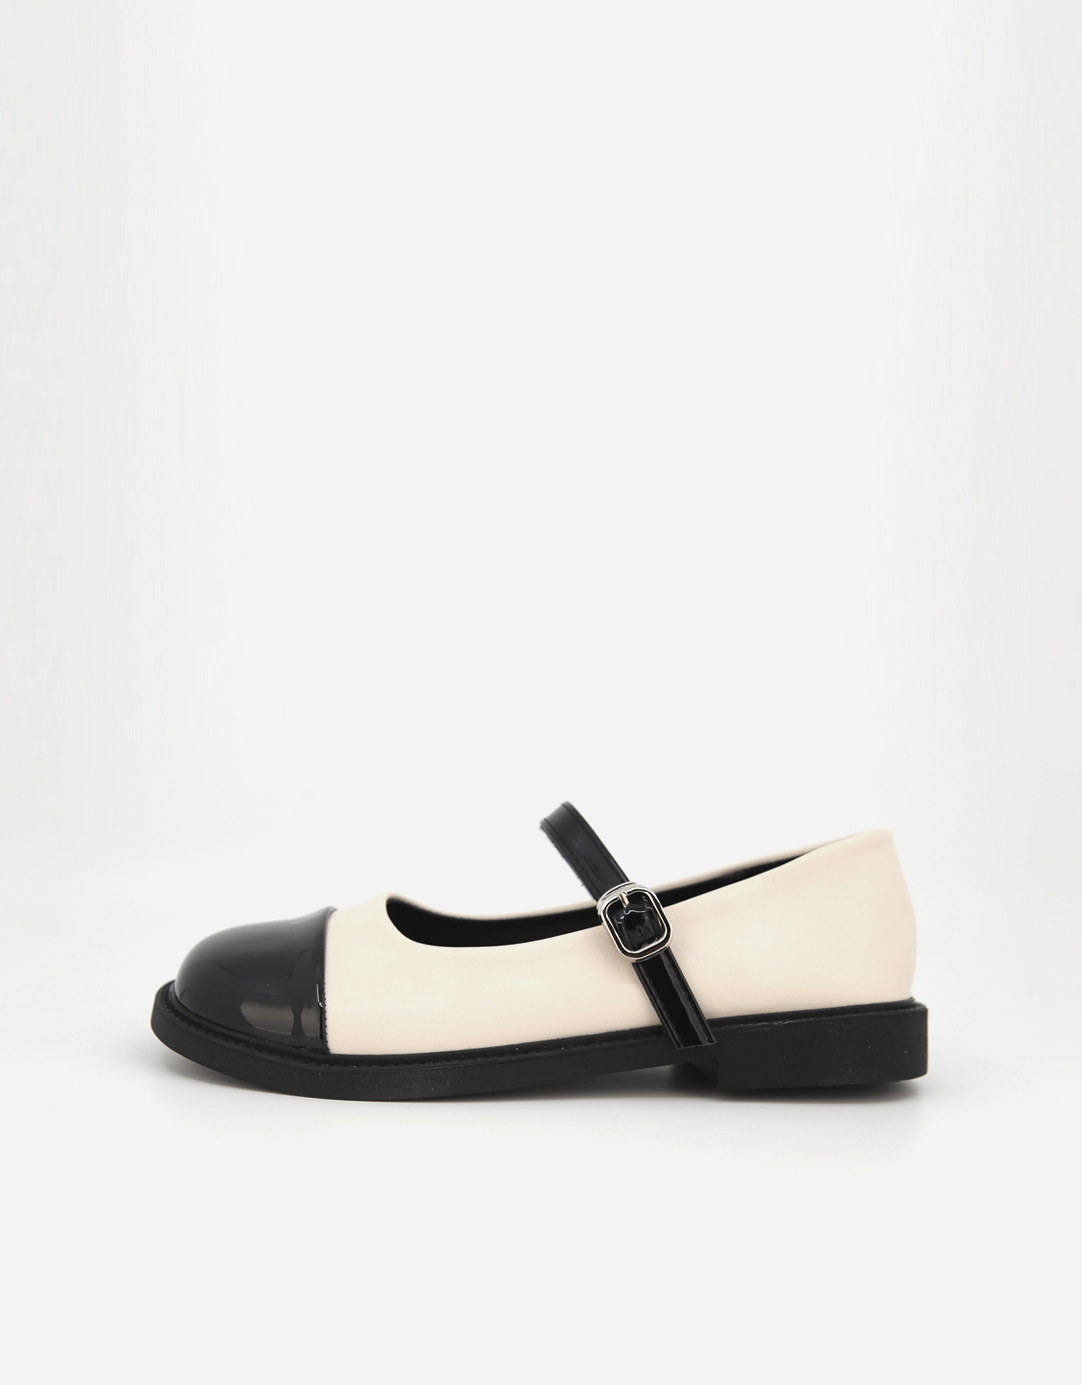 CLASSIC FLAT LOAFER